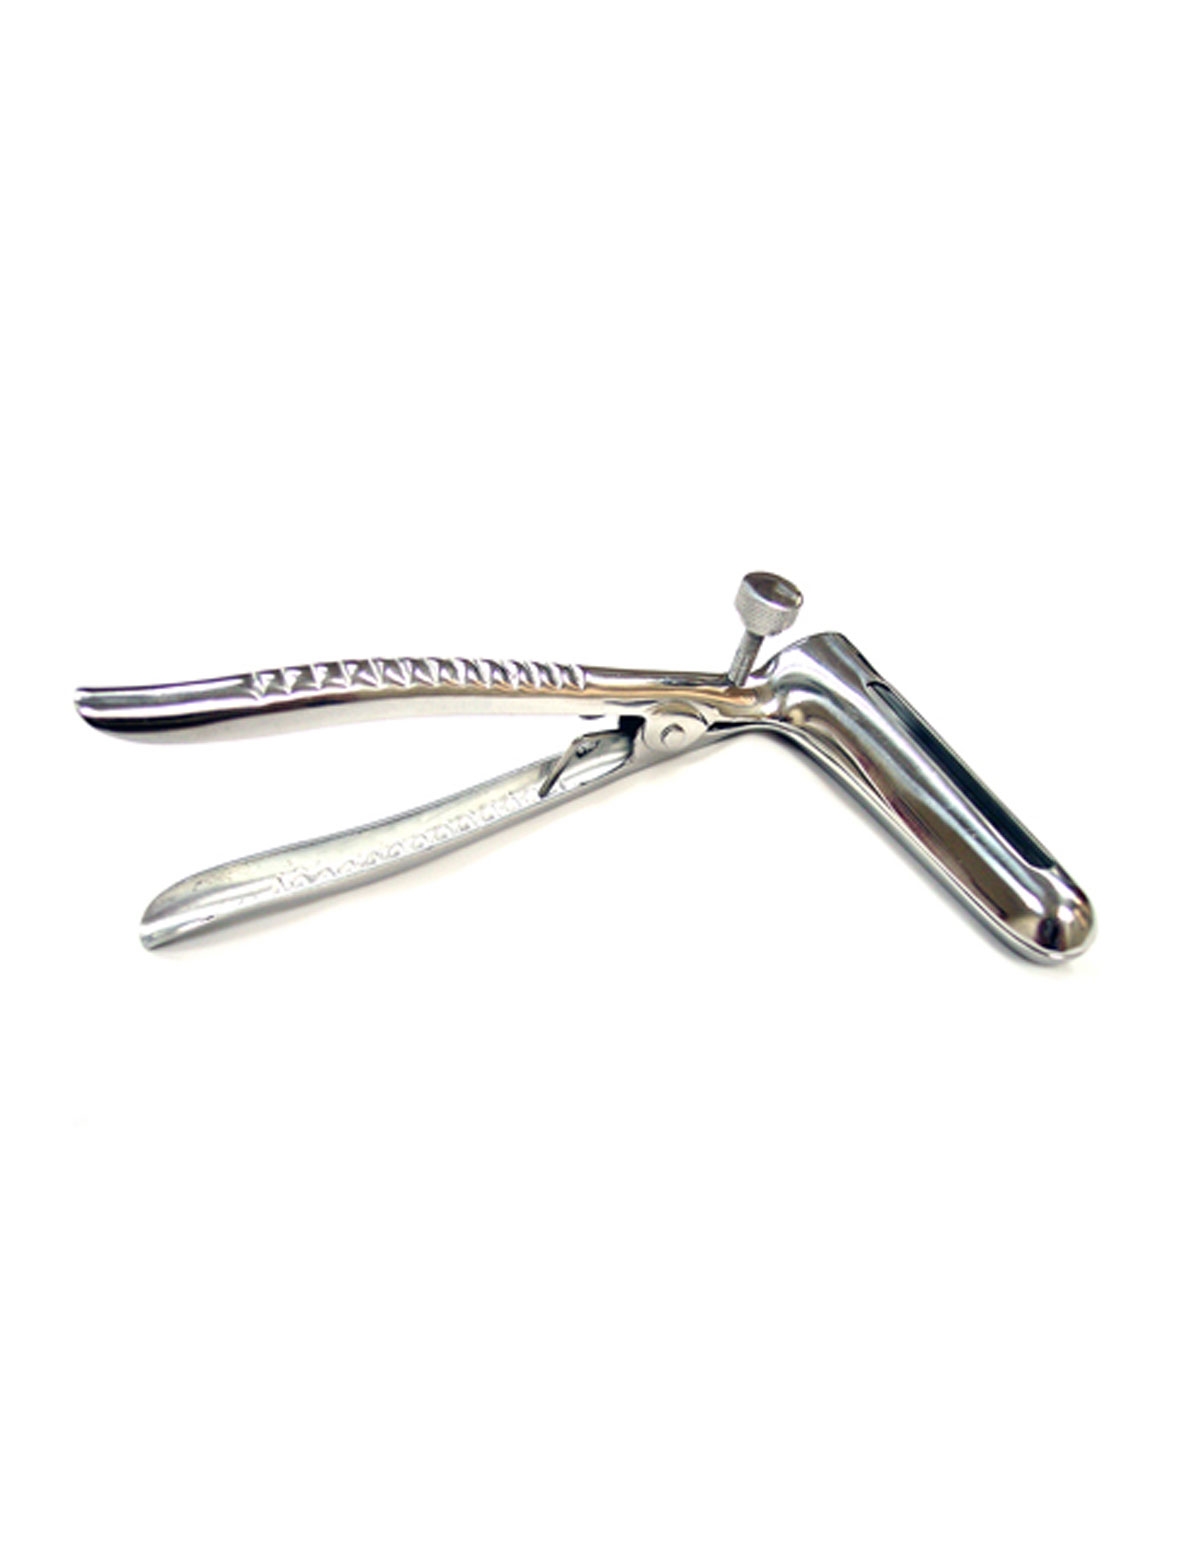 Stainless Steel Anal Speculum 54990 03066 Lover S Lane